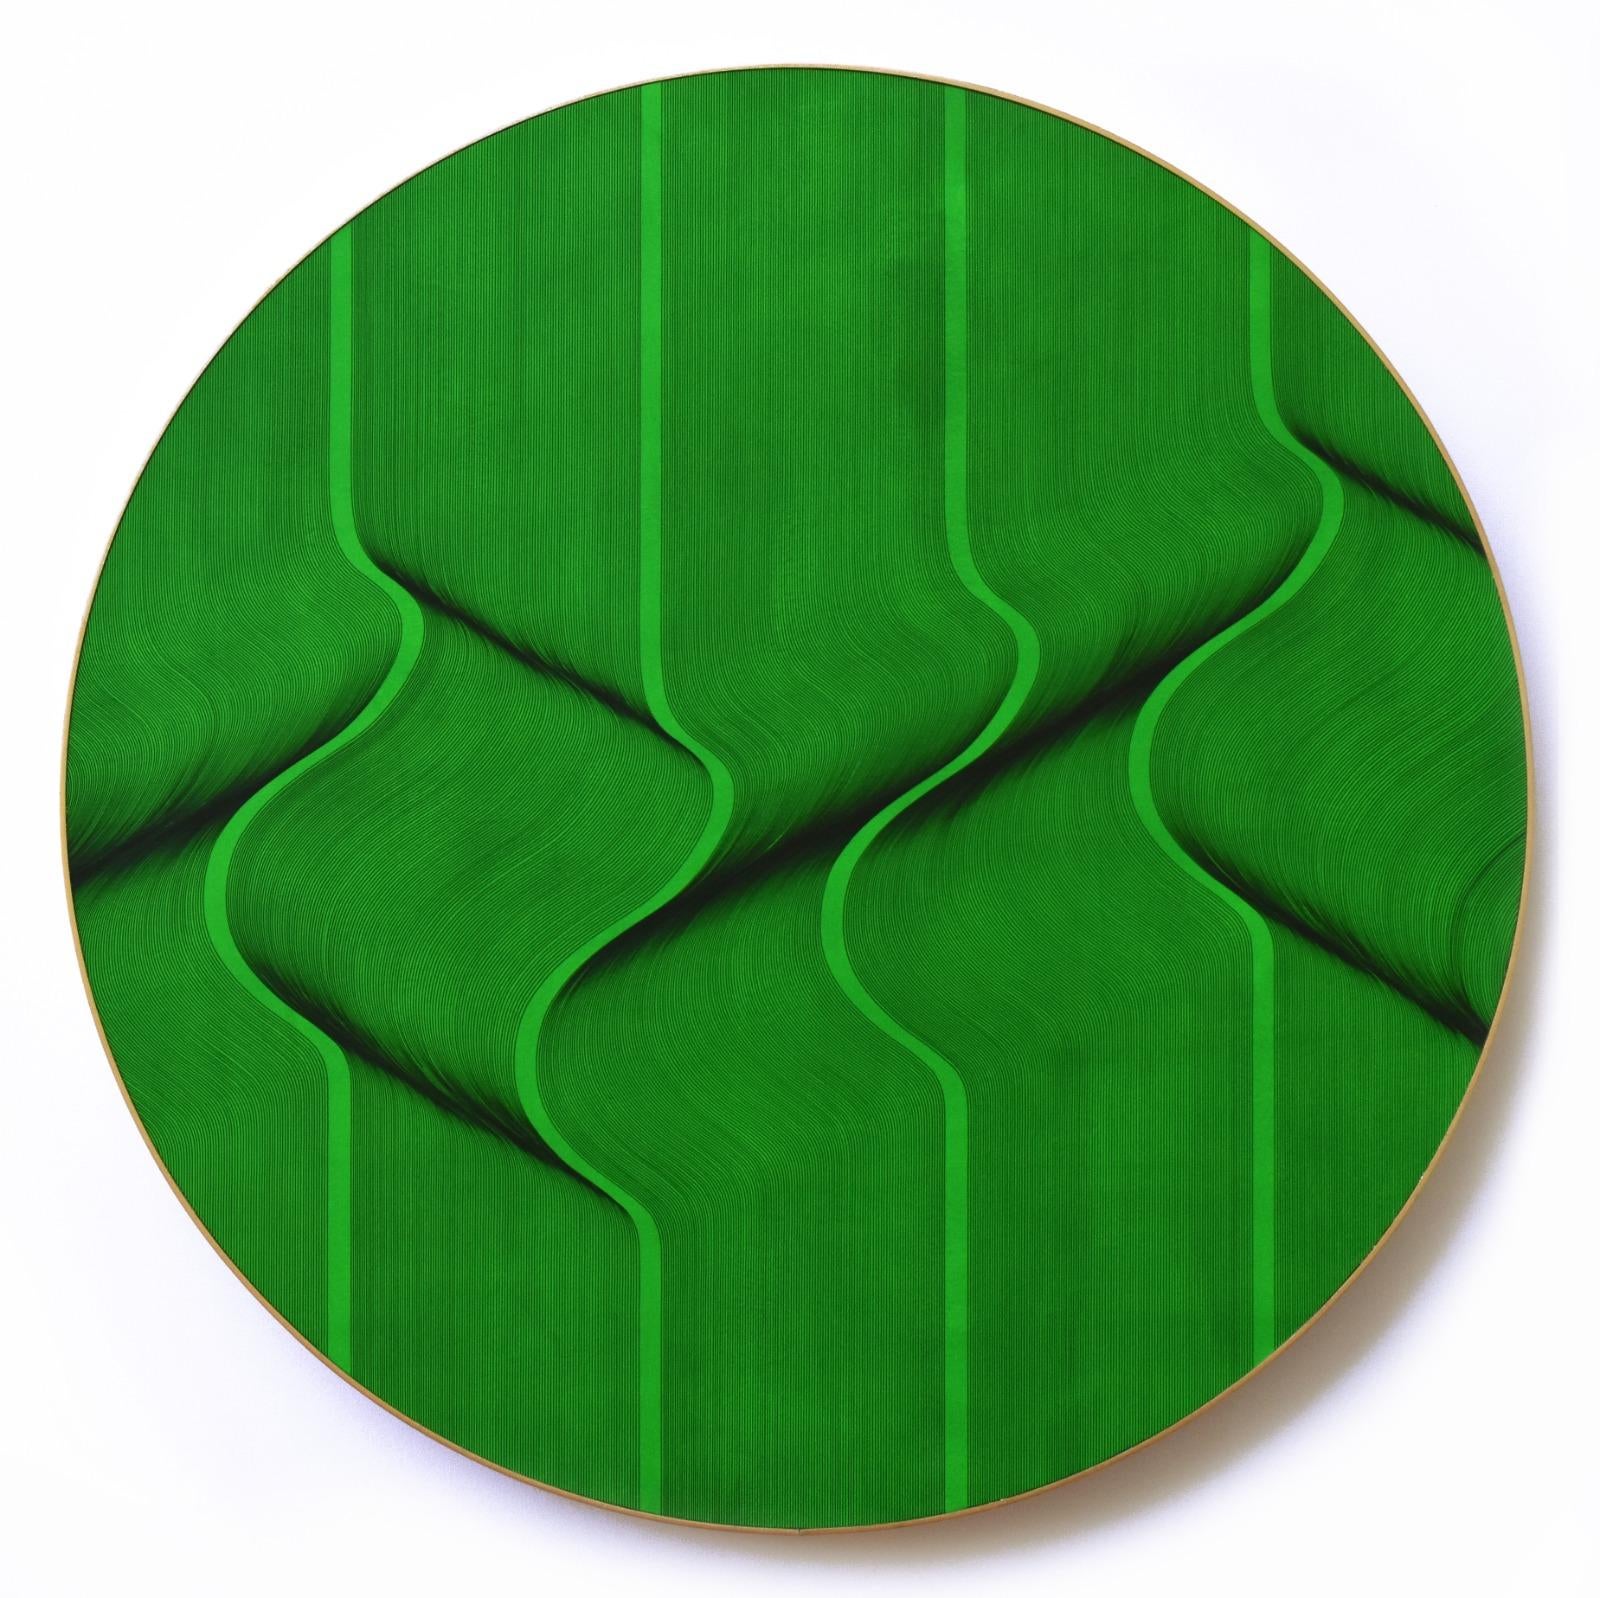 Green surface 2021 - geometric abstract painting - Abstract Geometric Painting by Roberto Lucchetta